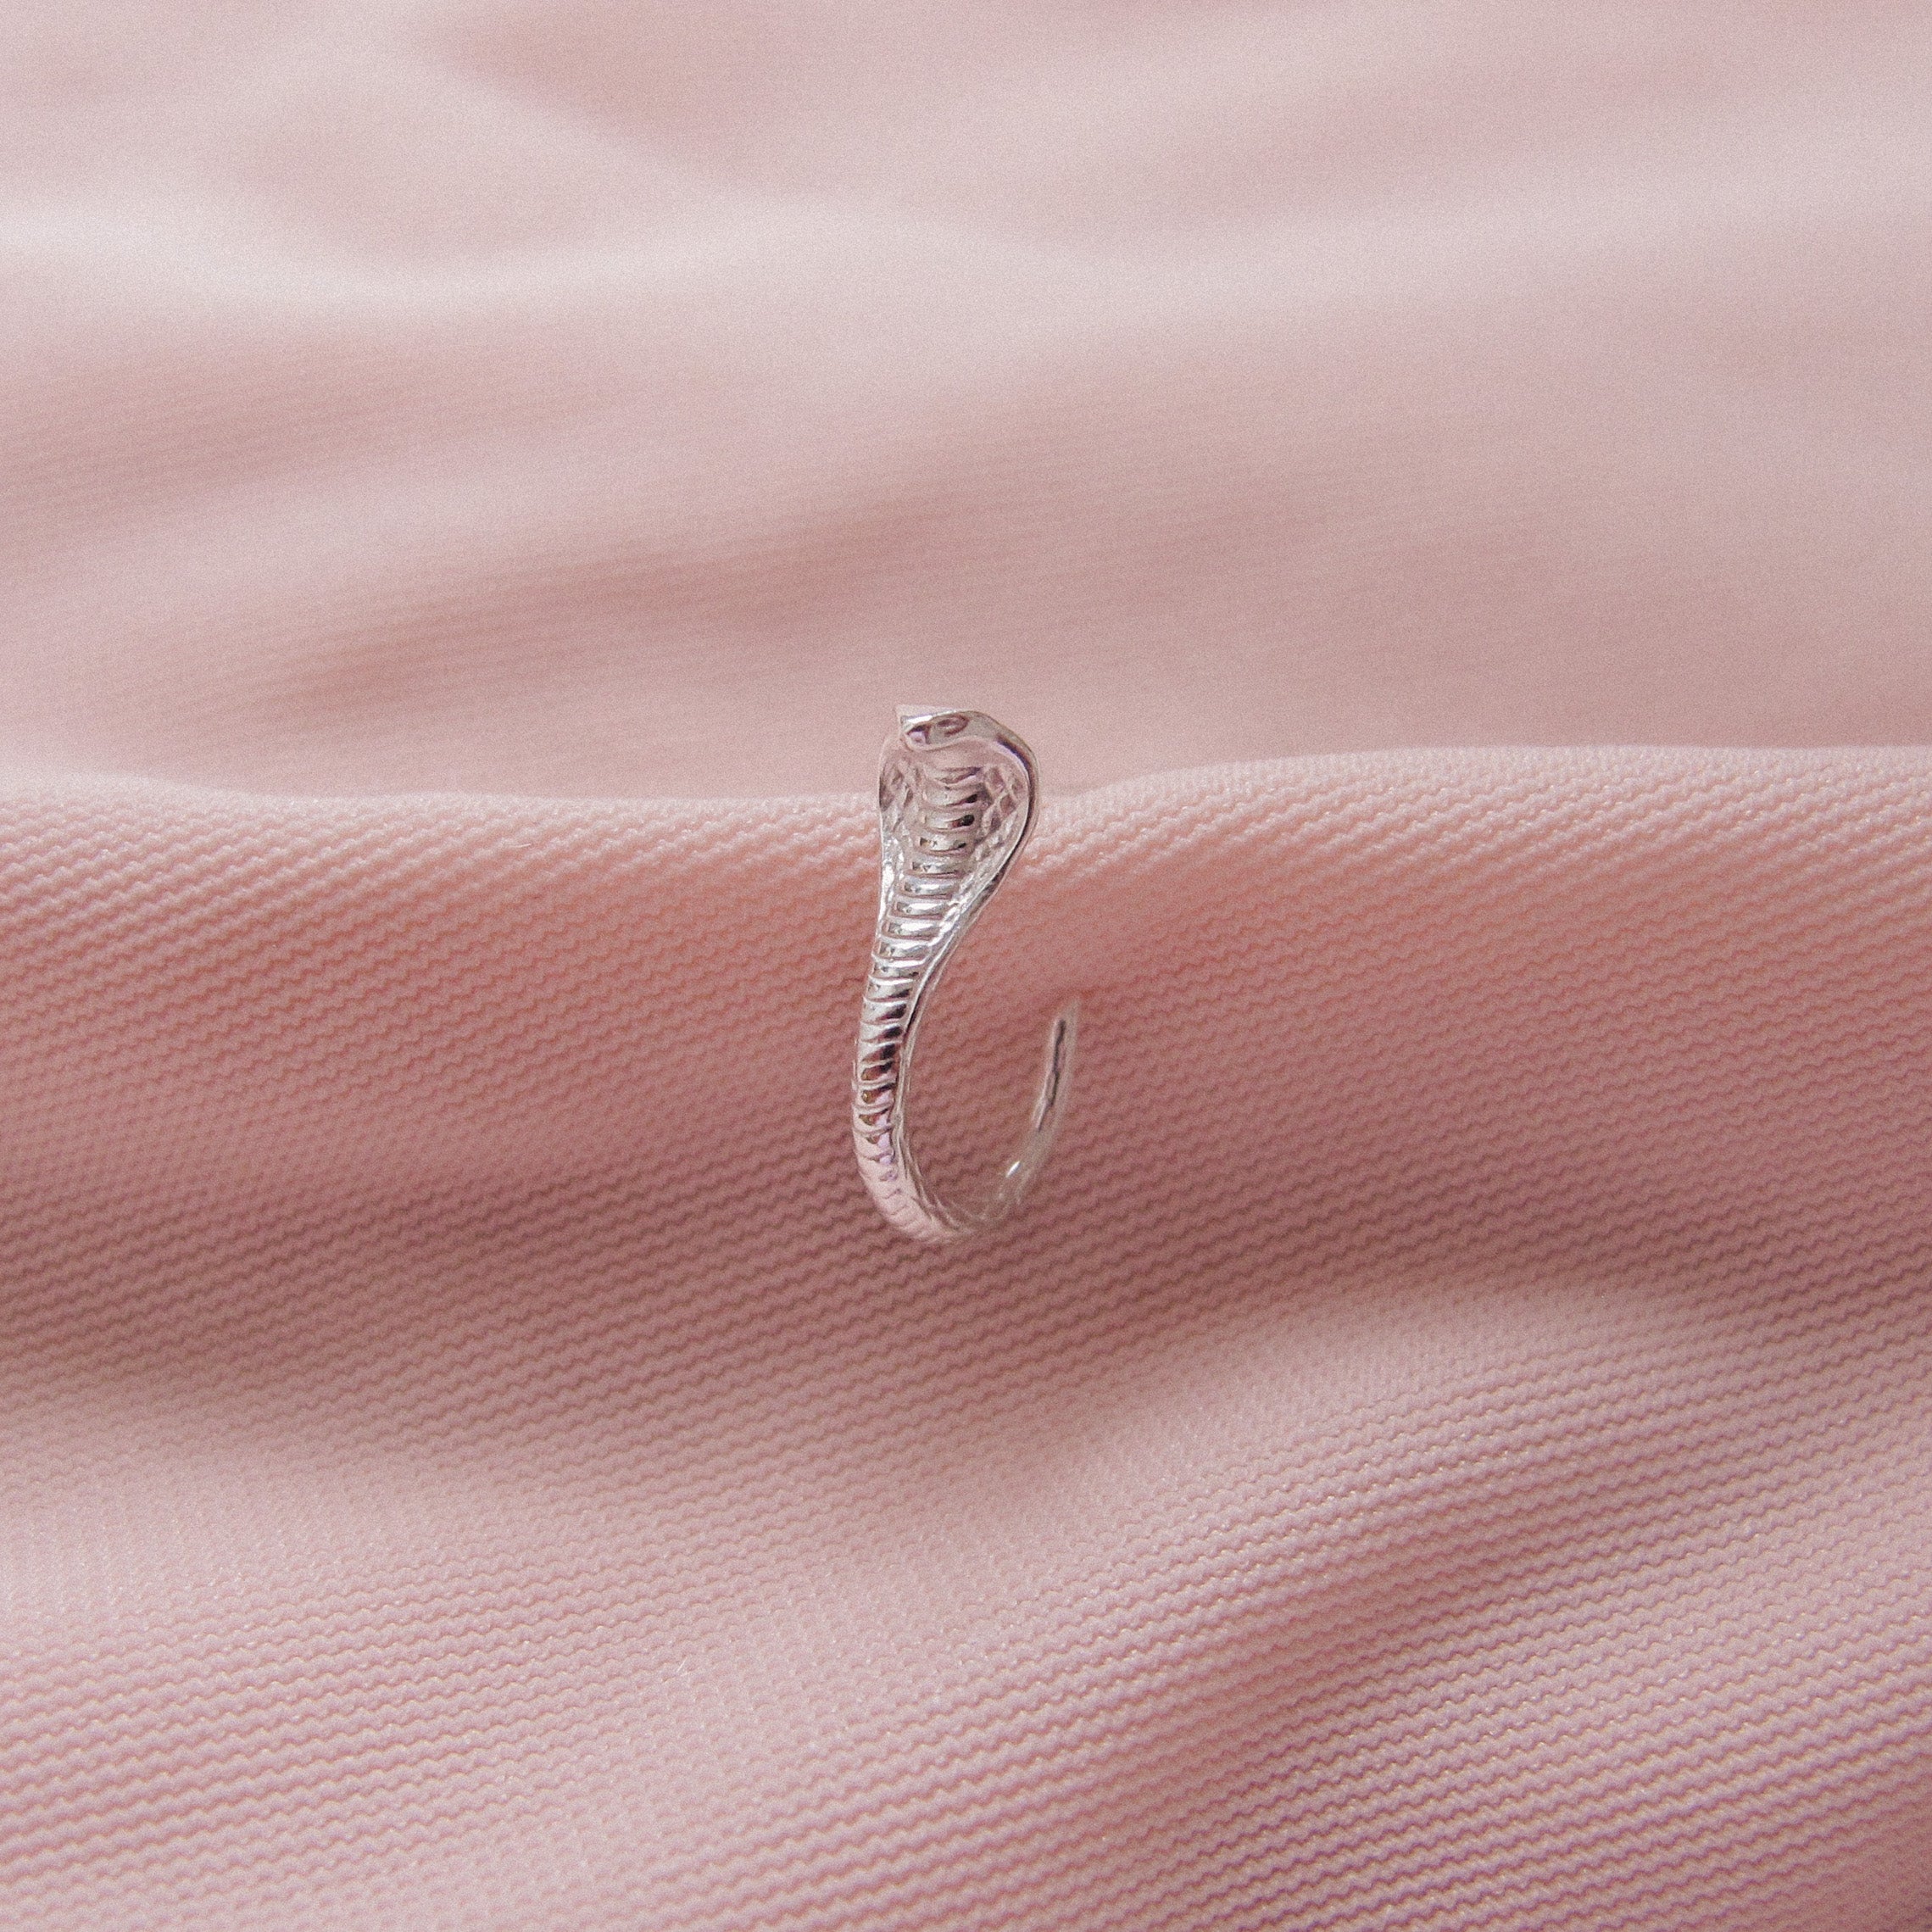 Clearance “Serpent" Snake Sterling Silver Stud